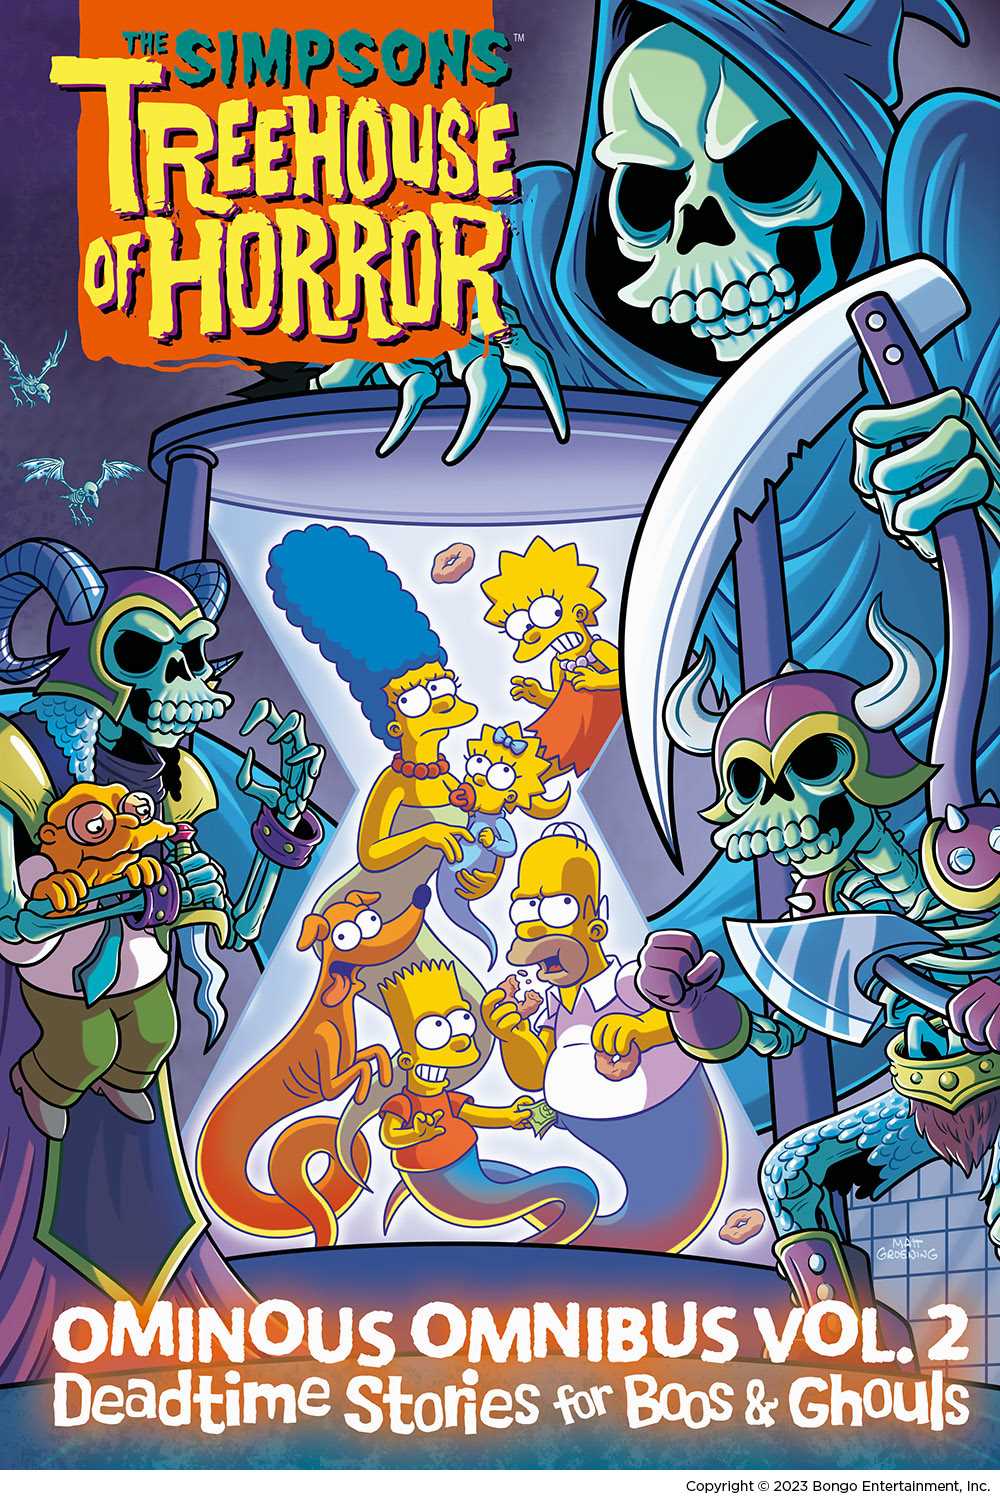 The Simpsons Treehouse of Horror Ominous Omnibus Vol. 2